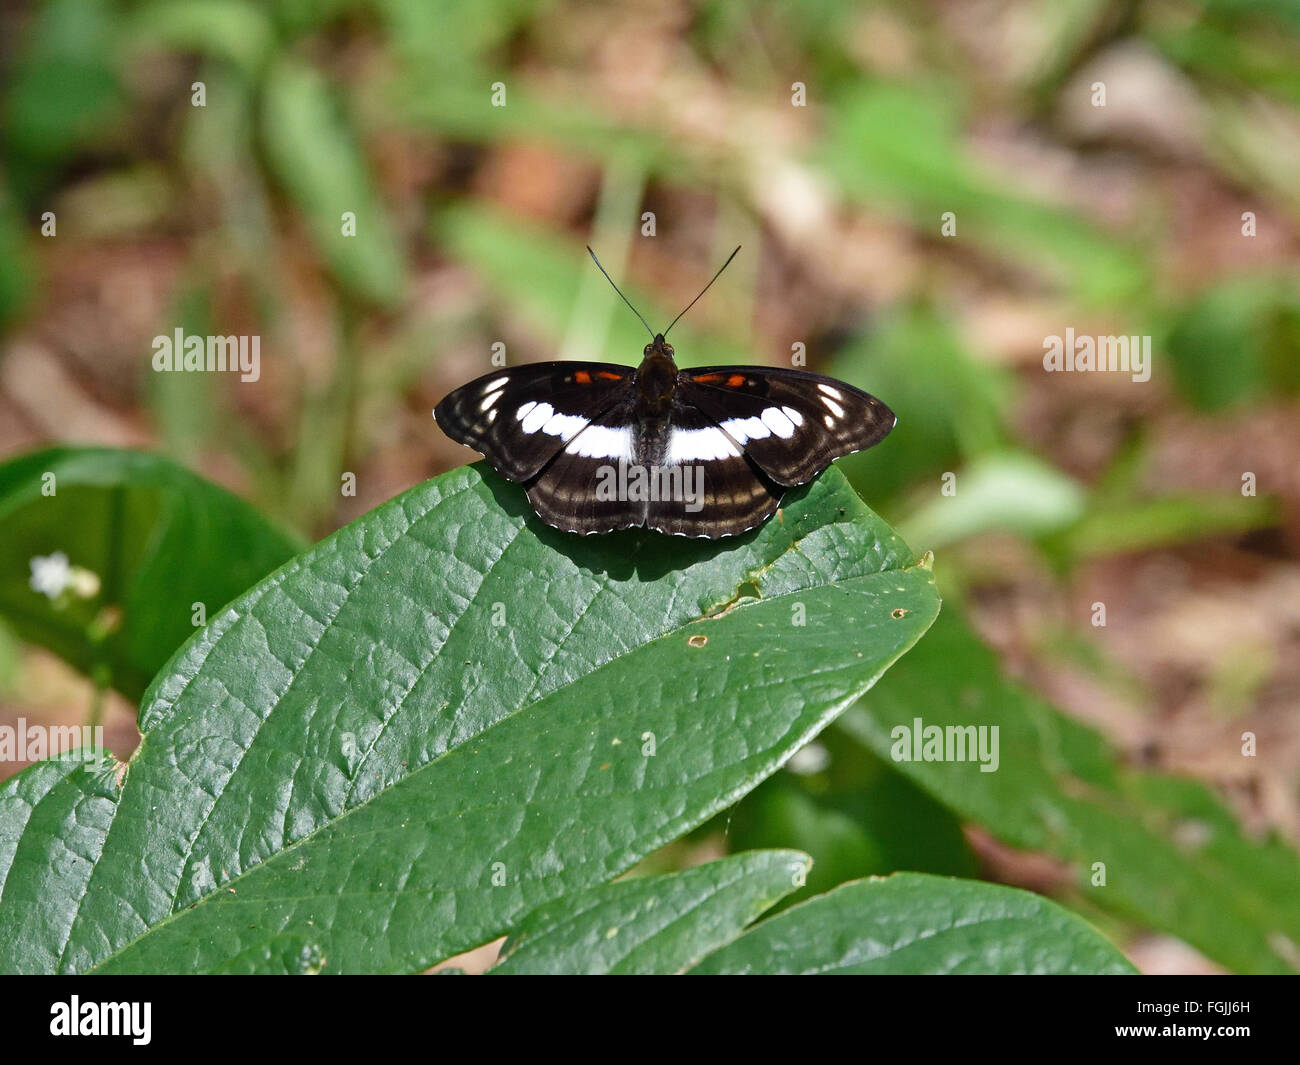 A male Staff Sargeant Butterfly (Nymphalidae) sunning itself on a leaf in Thailand Stock Photo